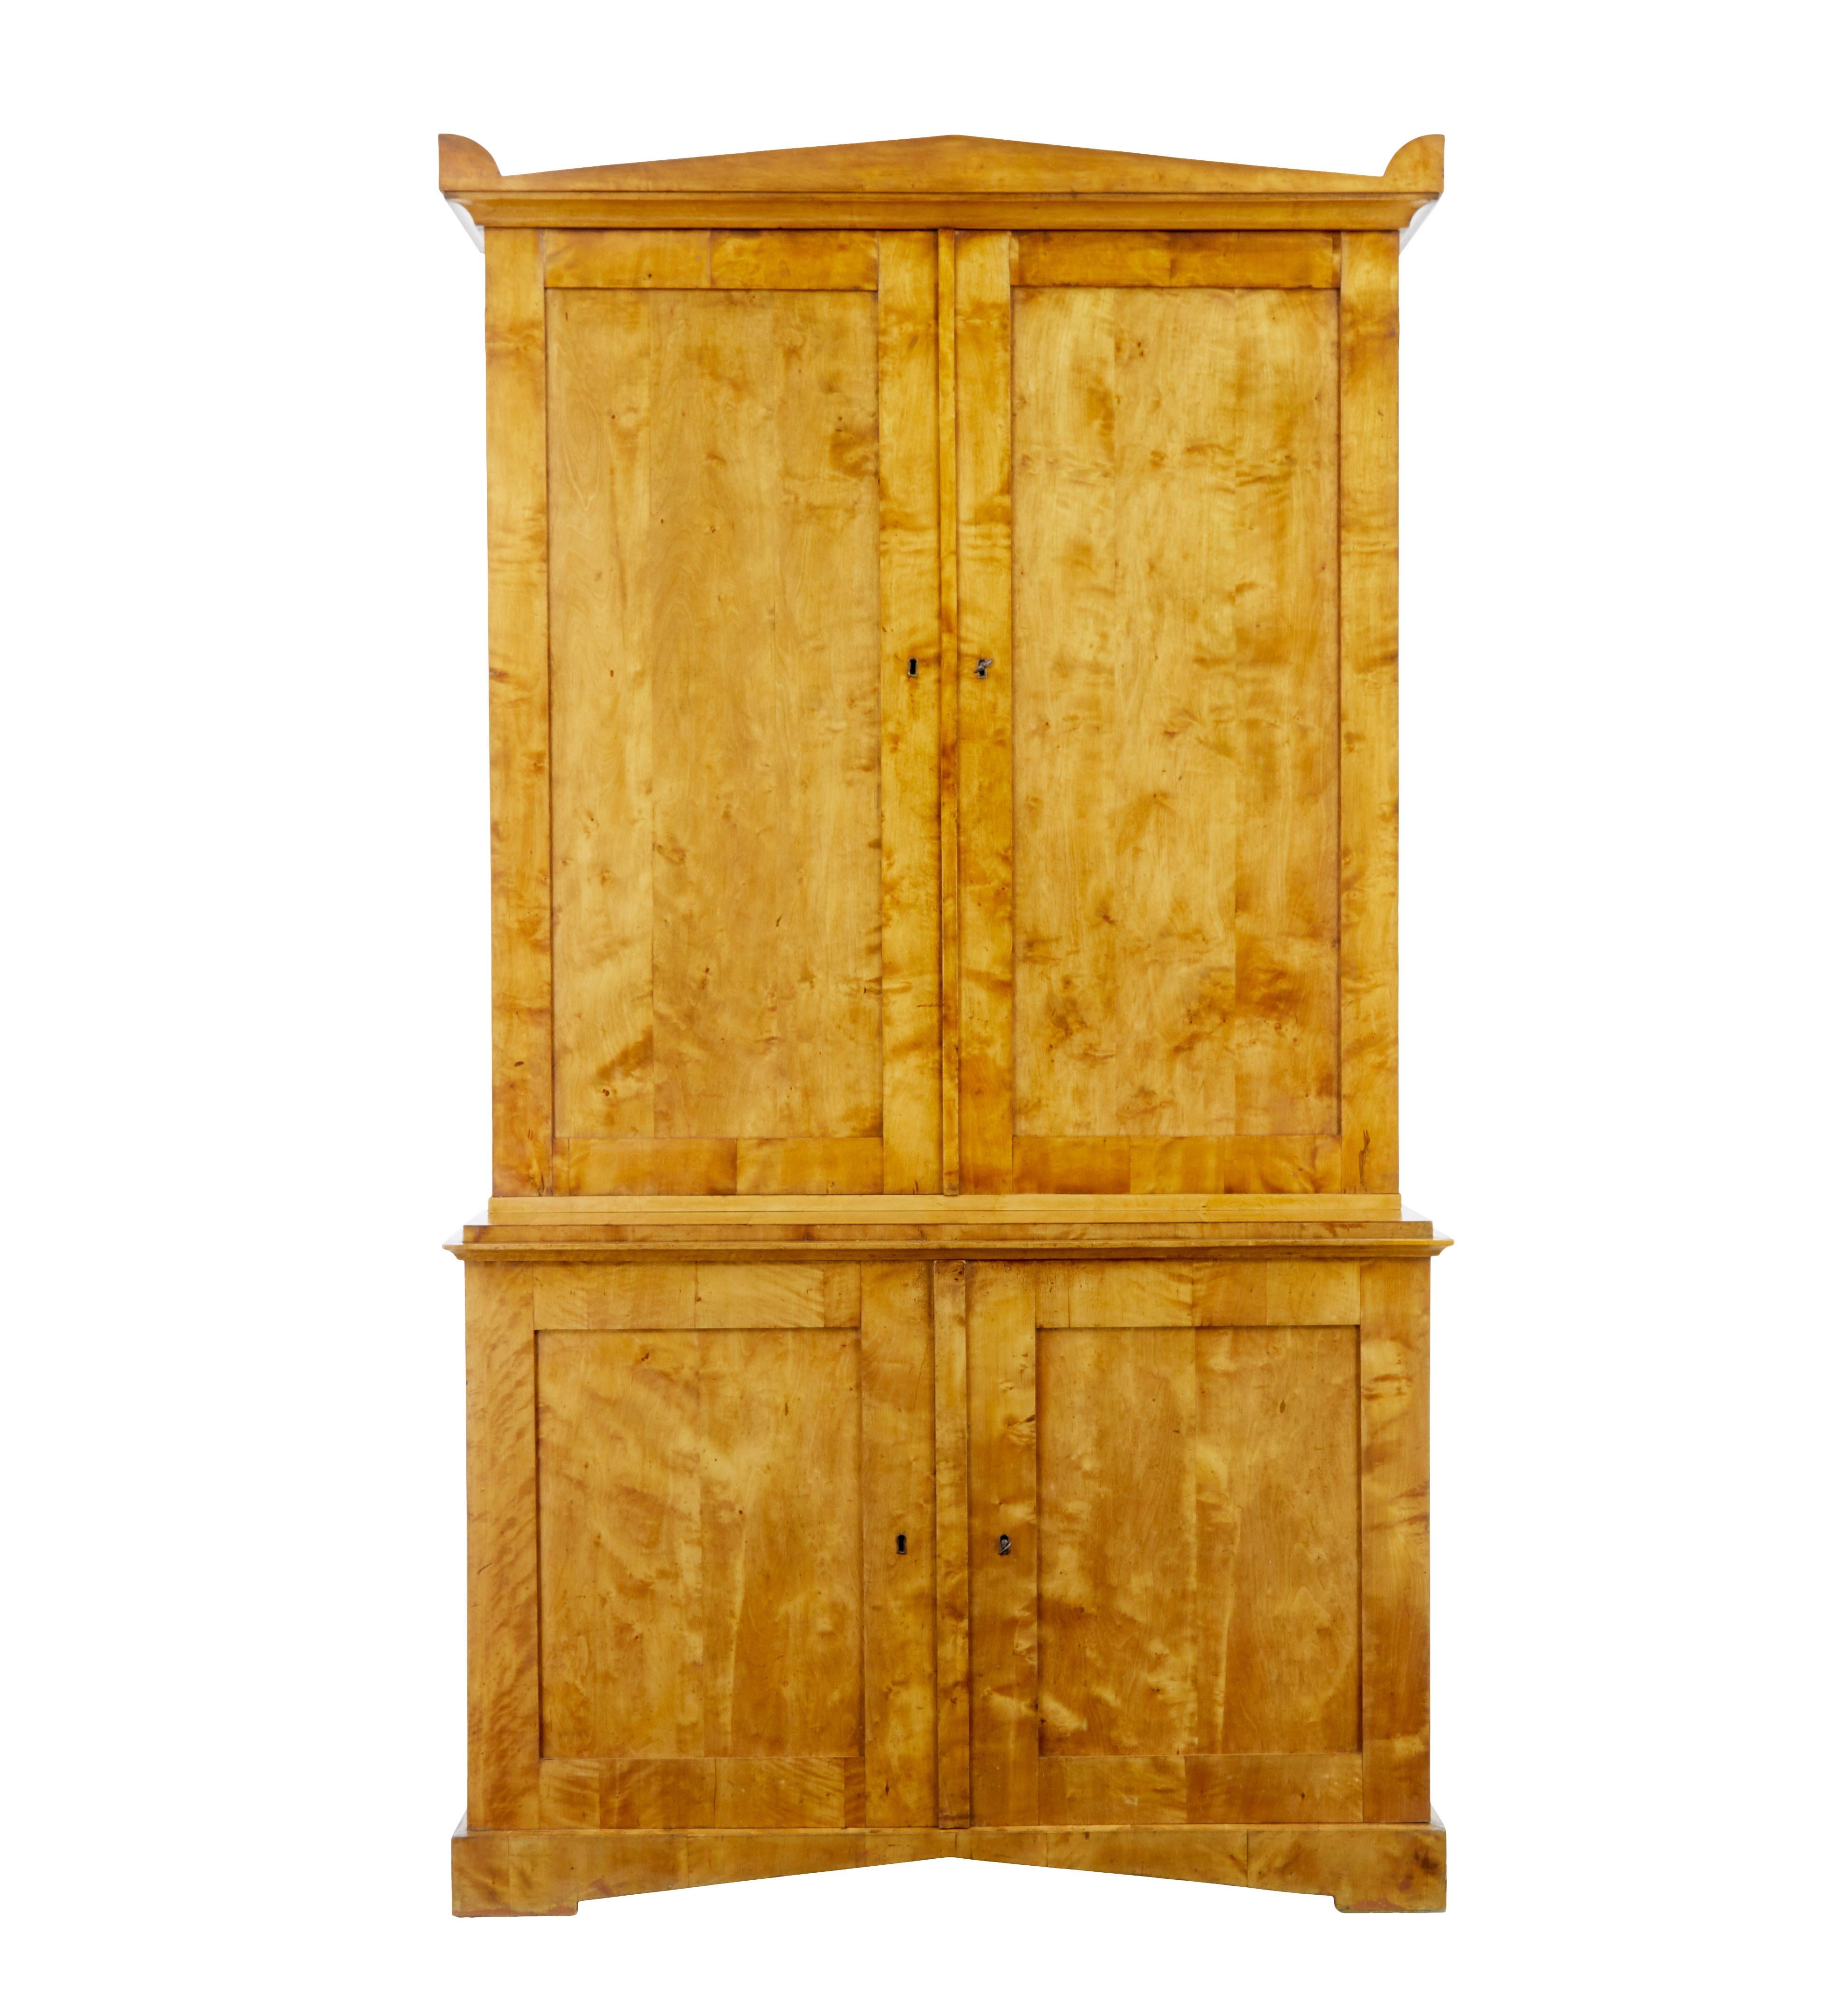 Fine quality Swedish 19th century birch cabinet circa 1870.

Good quality architectural birch cabinet from the mid-19th century. Cabinet comprises of 2 parts with rich quarter sawn veneers used. Shaped cornice with a double door cabinet below which